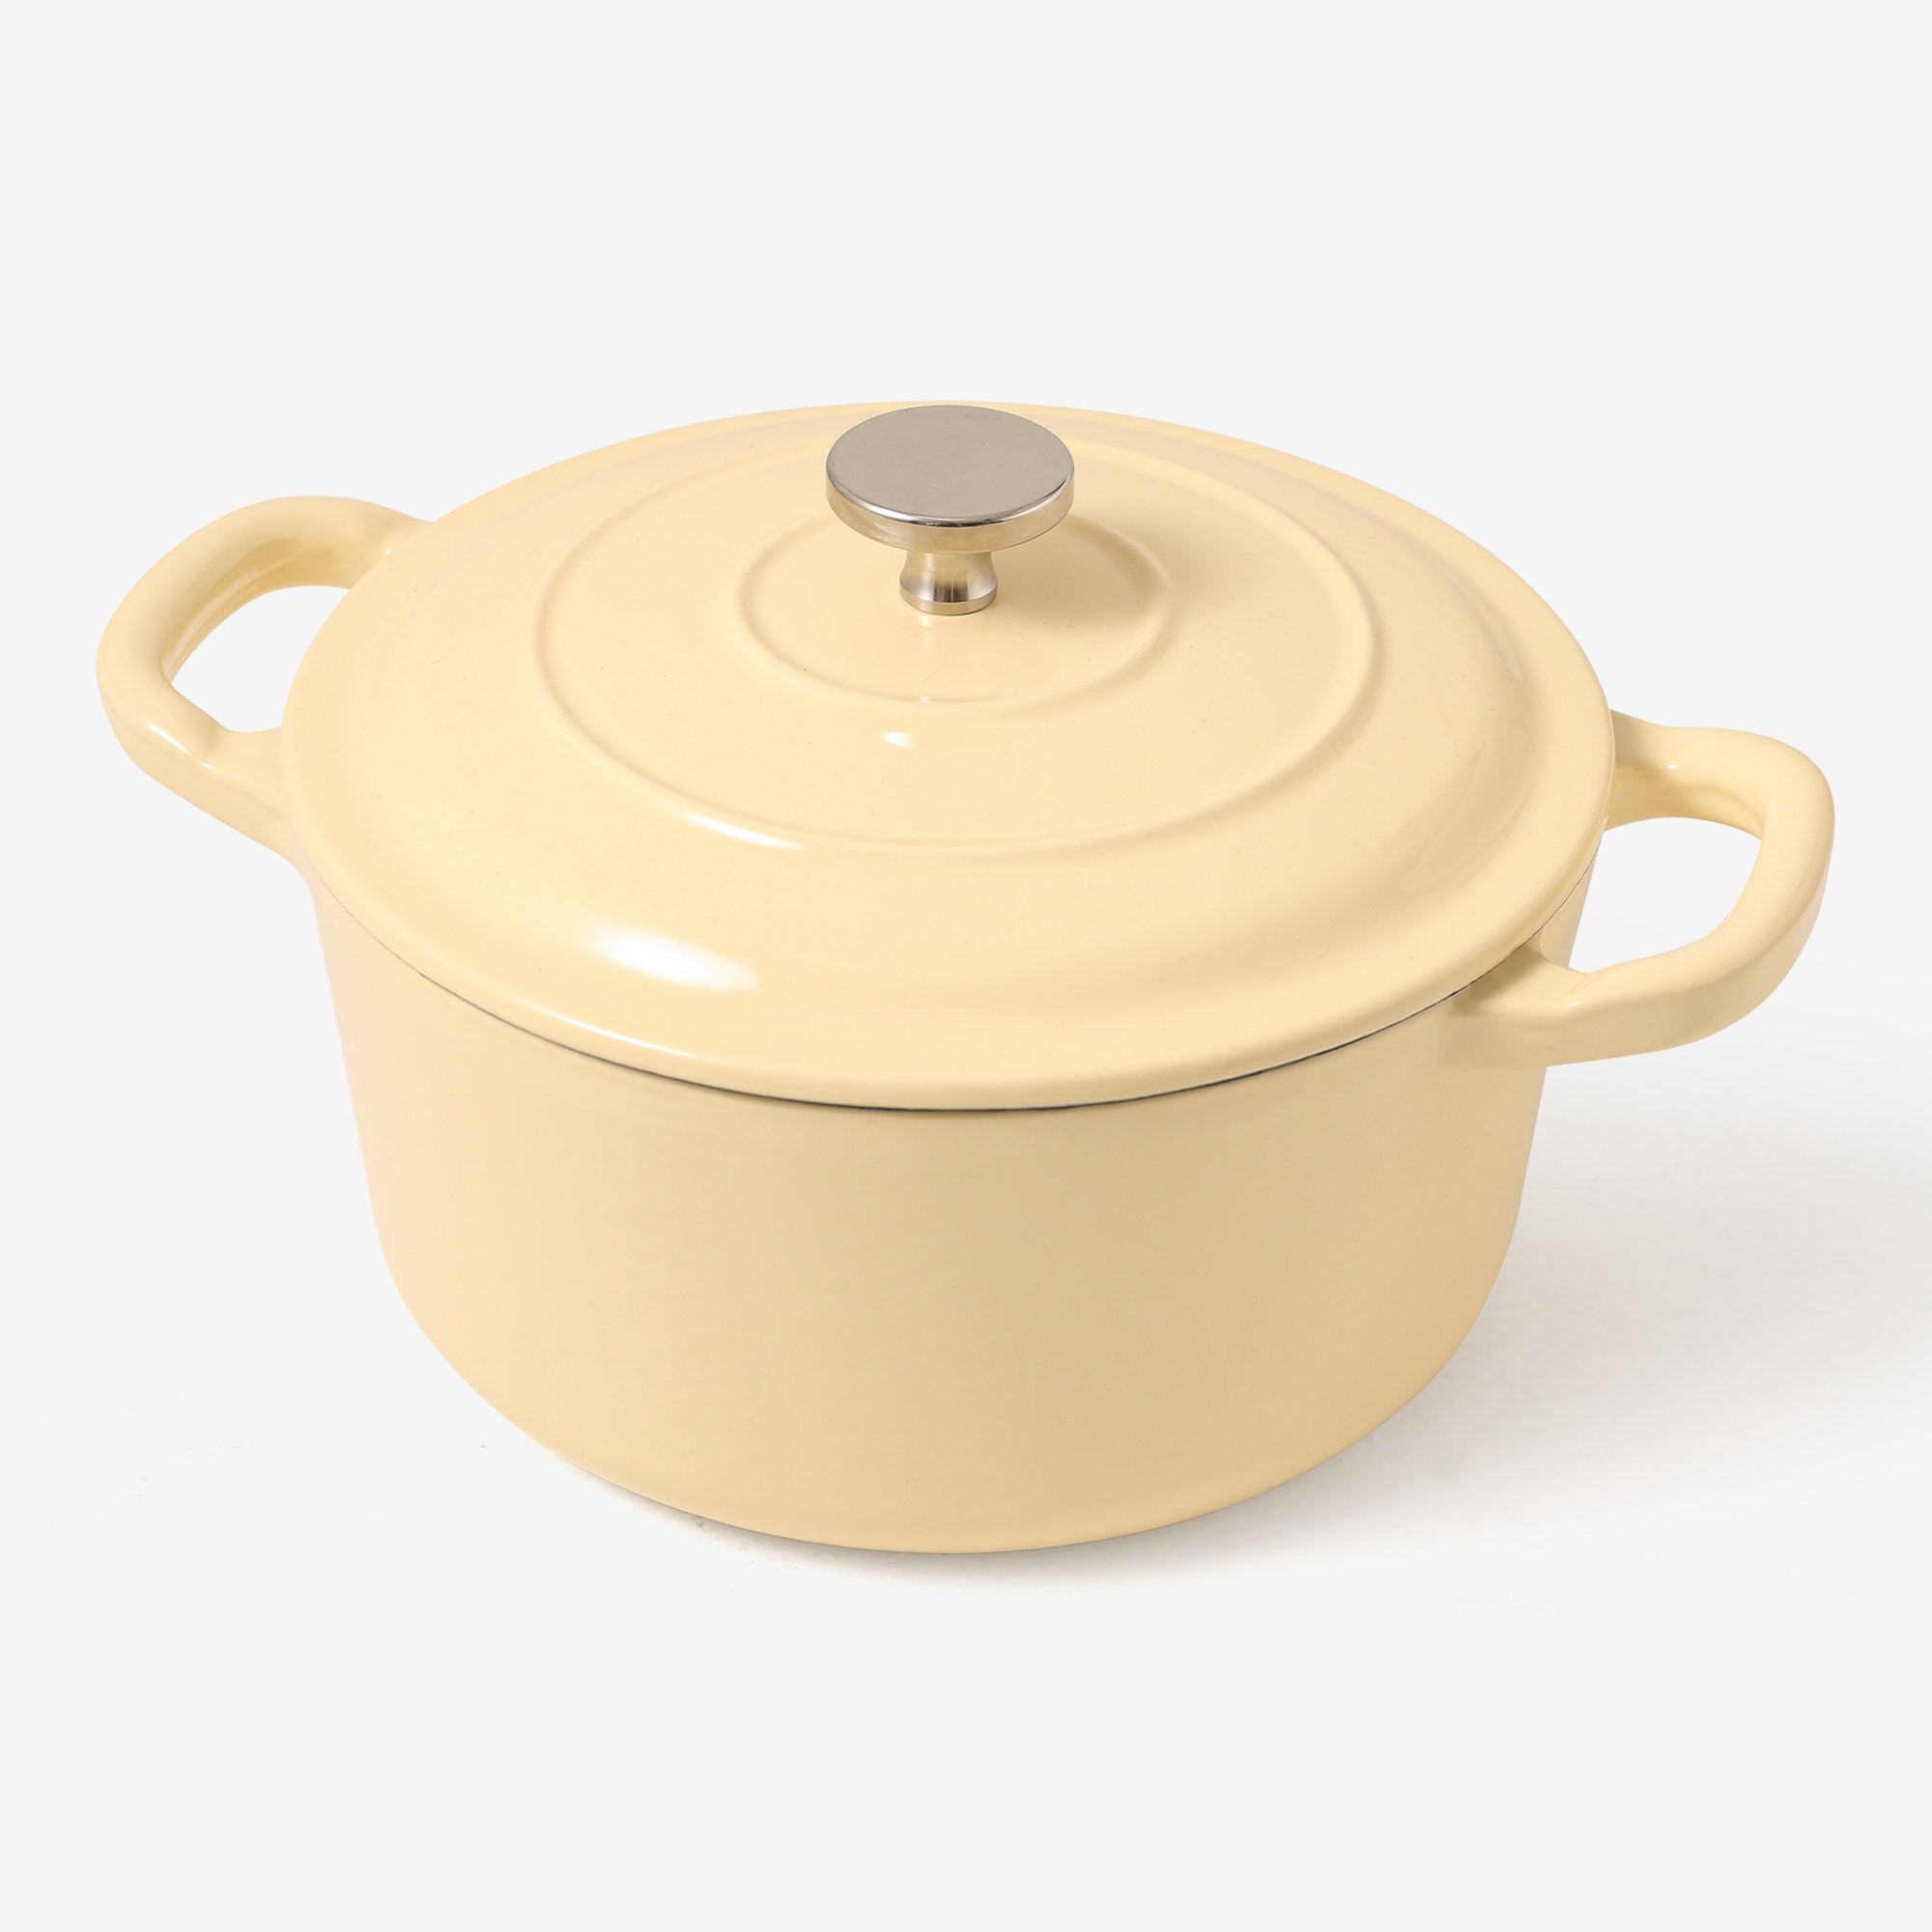 Cuisinart Chef's Classic Enameled Cast Iron 7-Quart Round Covered Casserole, Yellow